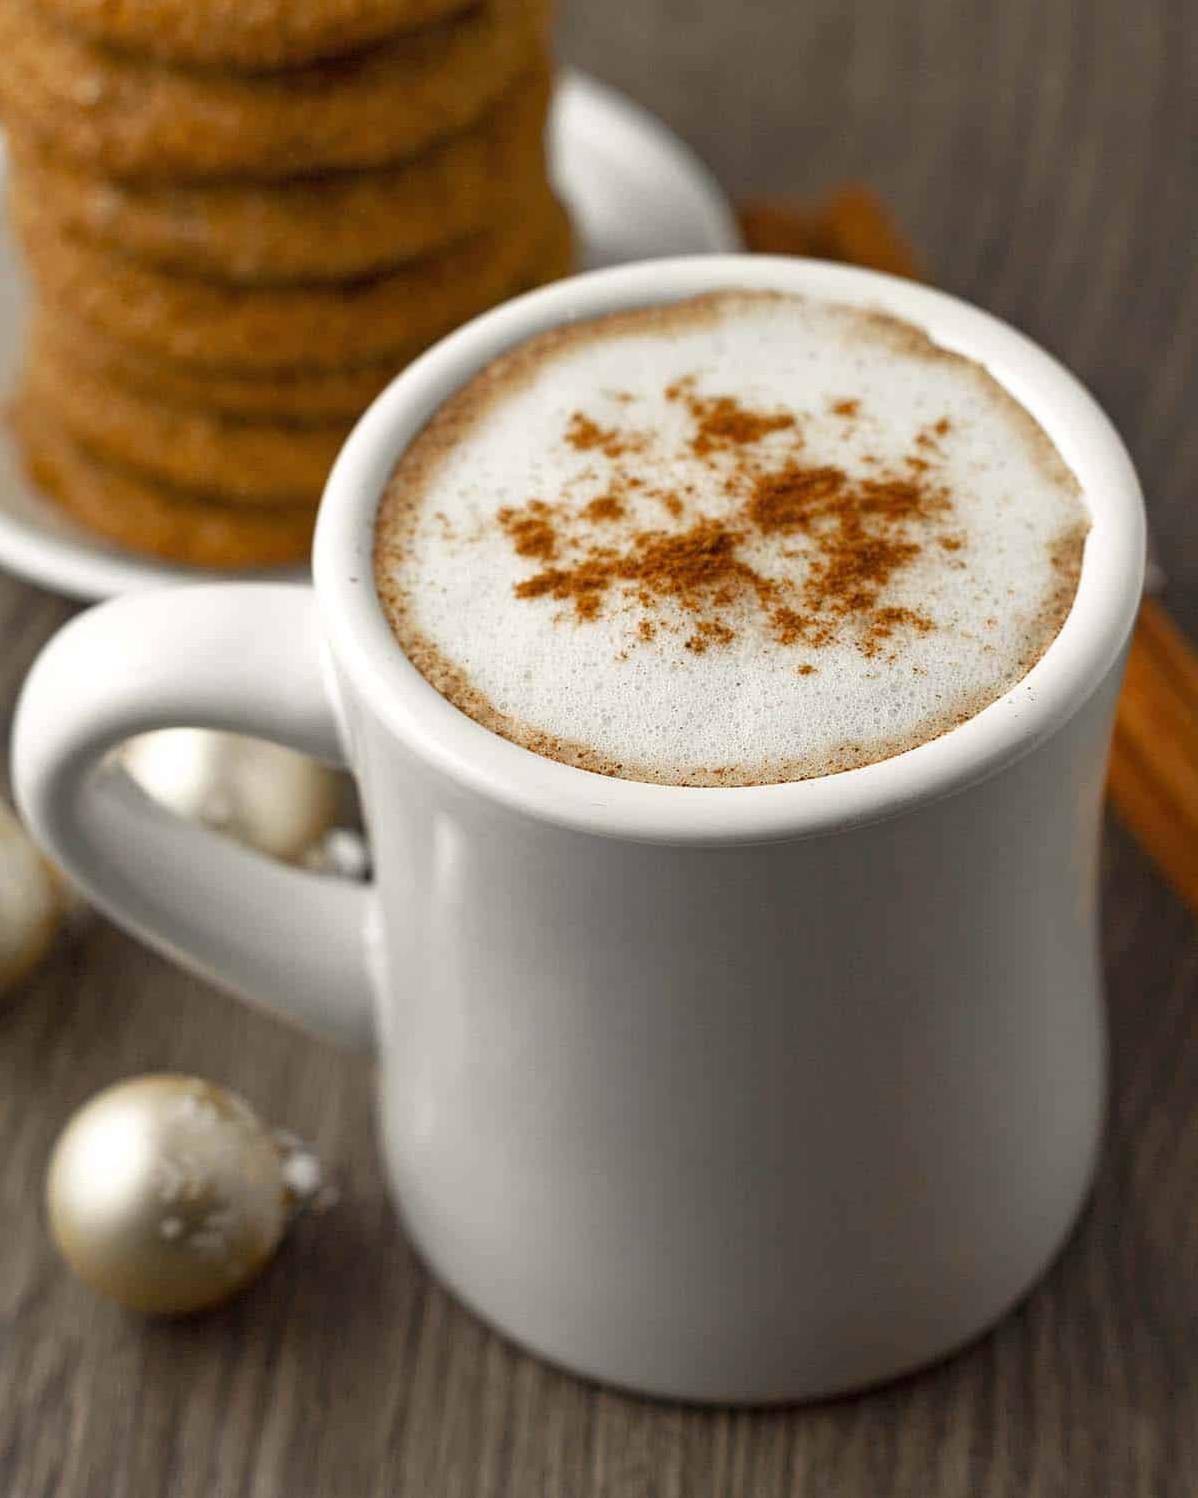  Rich espresso, creamy milk, and warming spices come together in this vegan Gingerbread Latte.